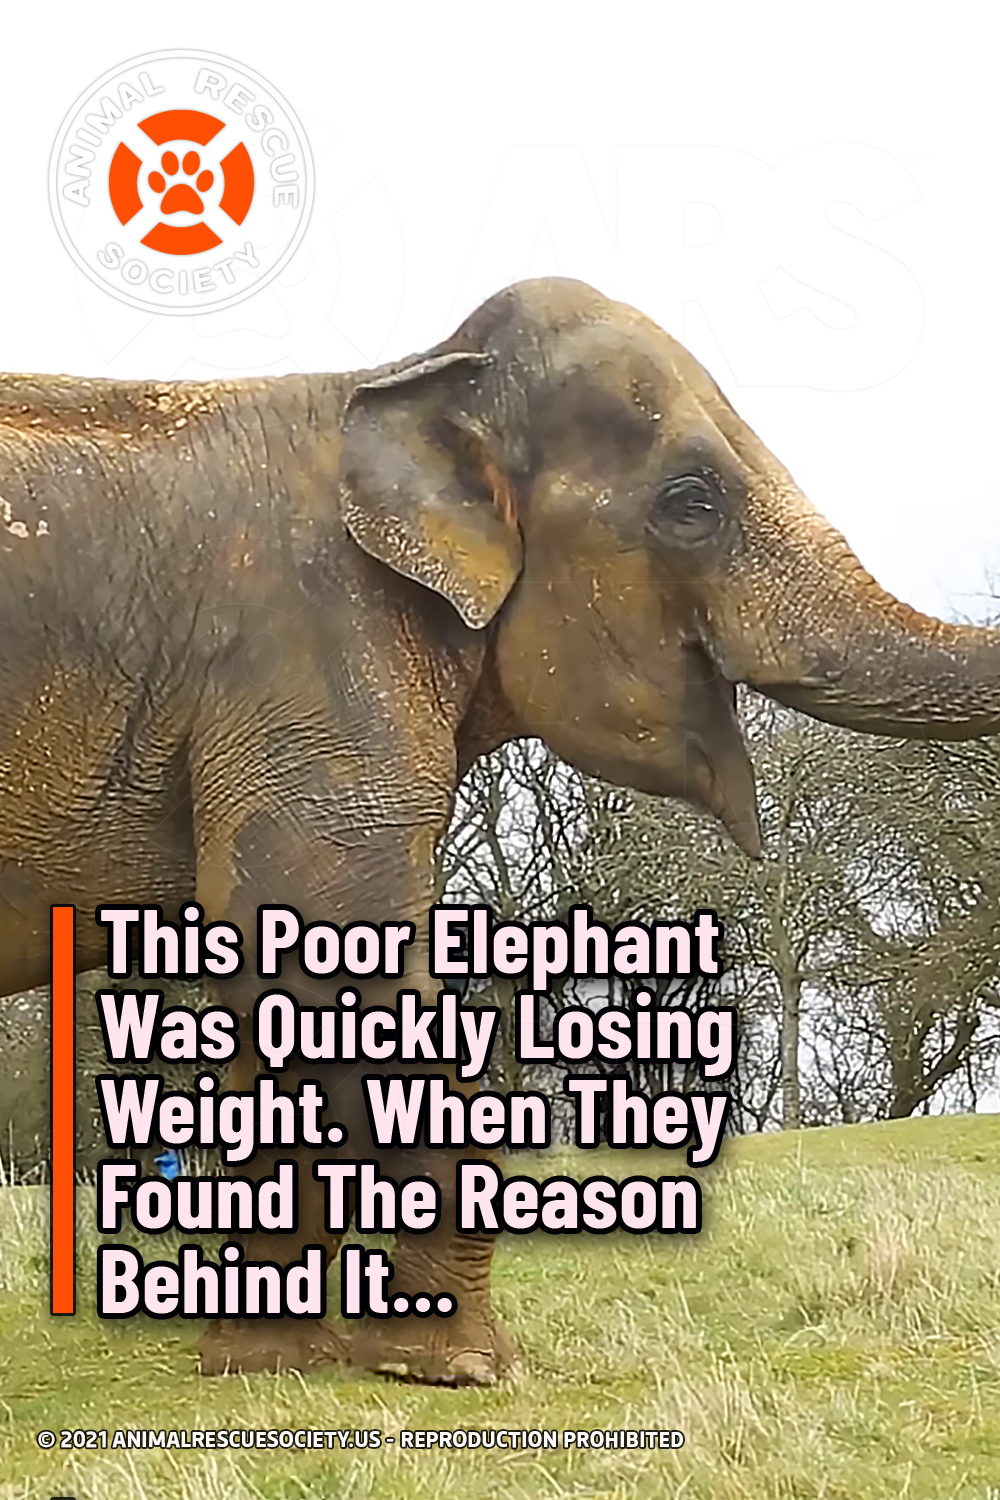 This Poor Elephant Was Quickly Losing Weight. When They Found The Reason Behind It…